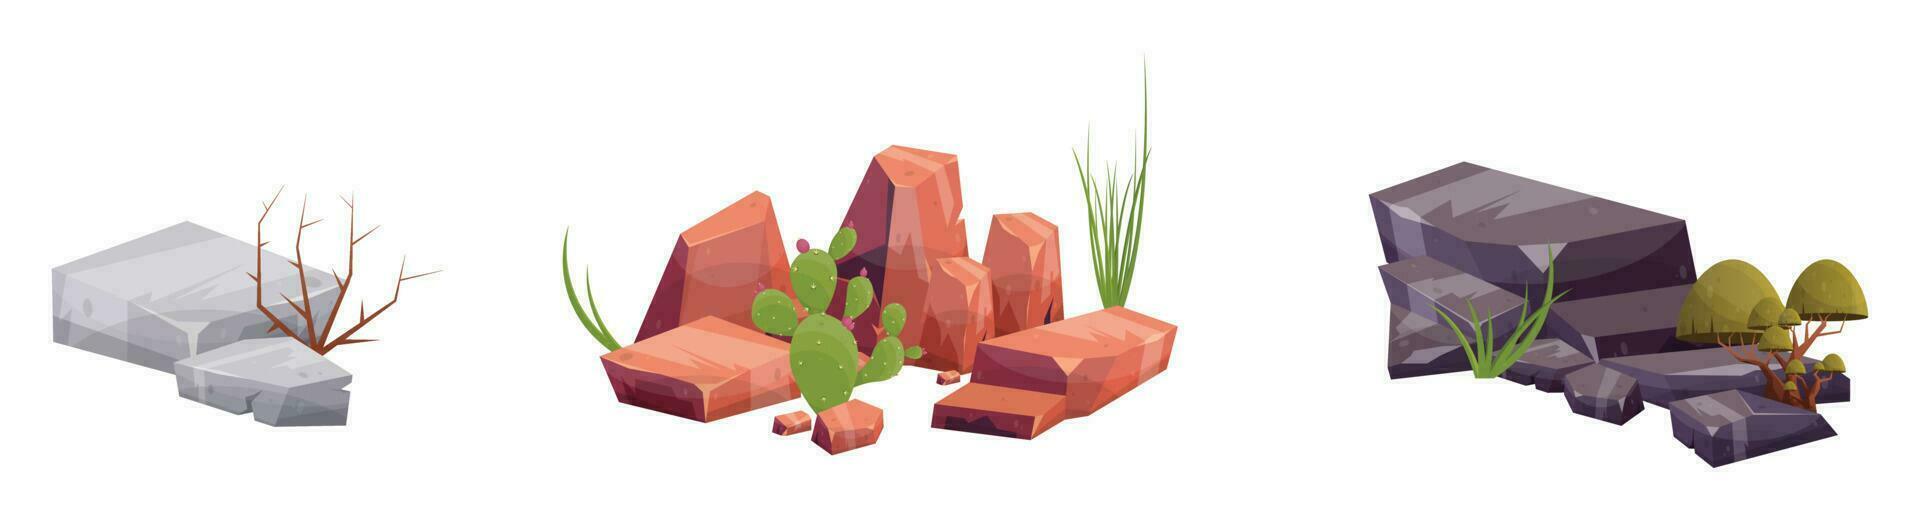 Desert rock with plants in different colors vector illustration isolated on white